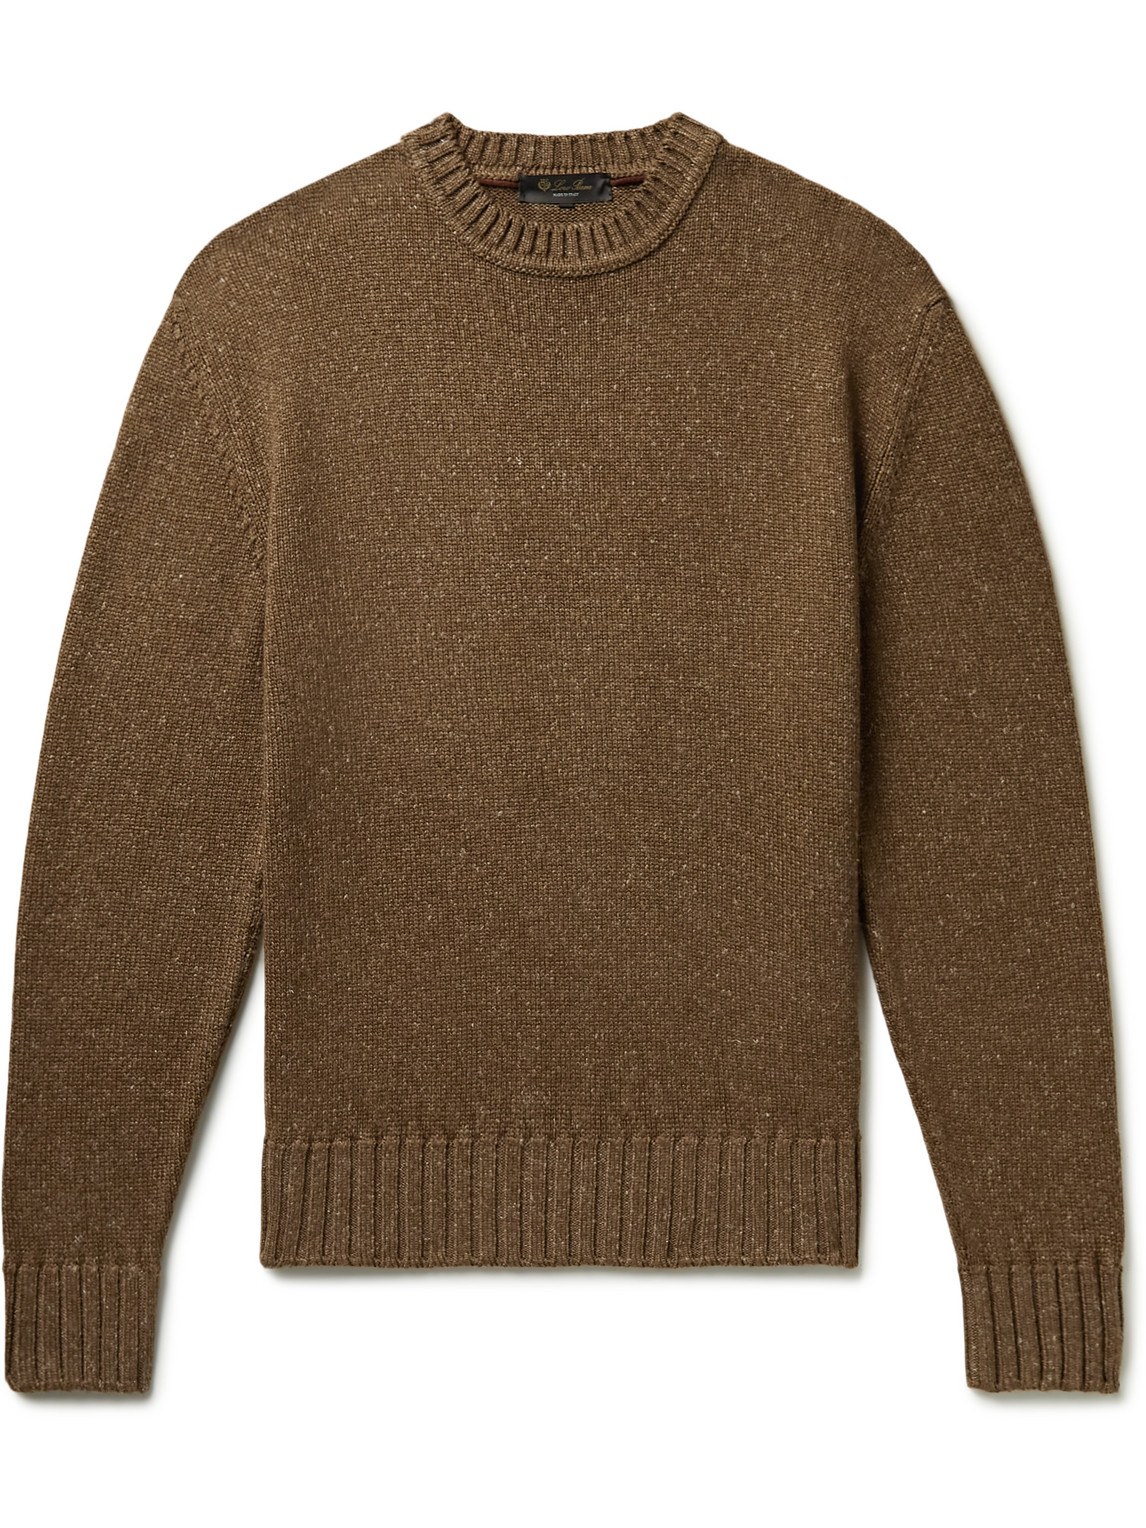 Loro Piana Shorwell Silk, Cashmere And Linen-blend Sweater In Brown